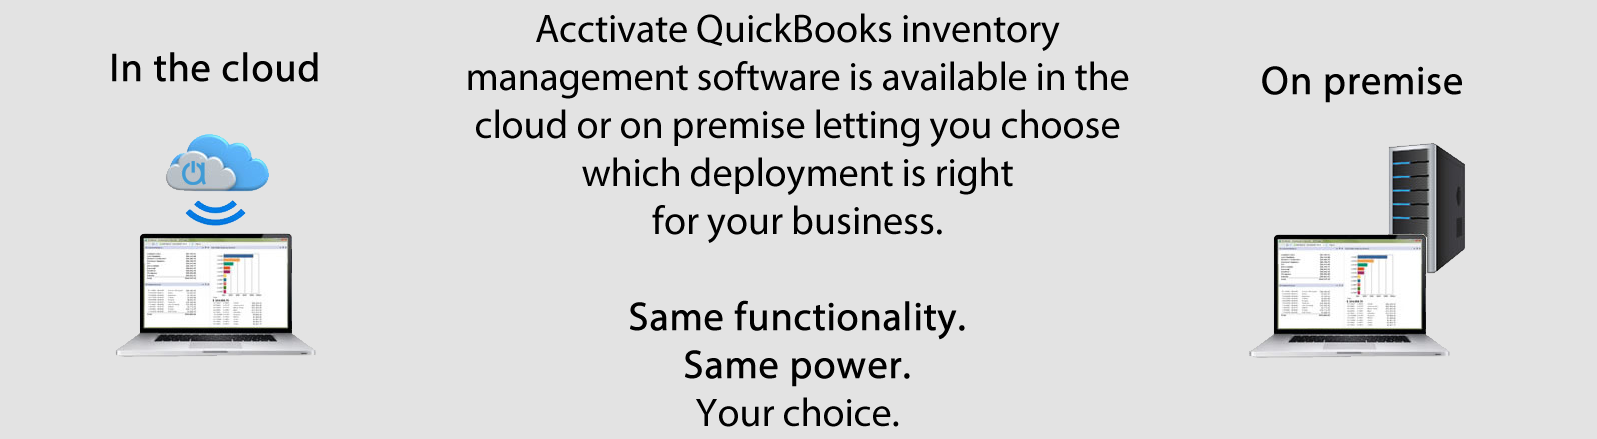 easy to use inventory management software with quickbooks